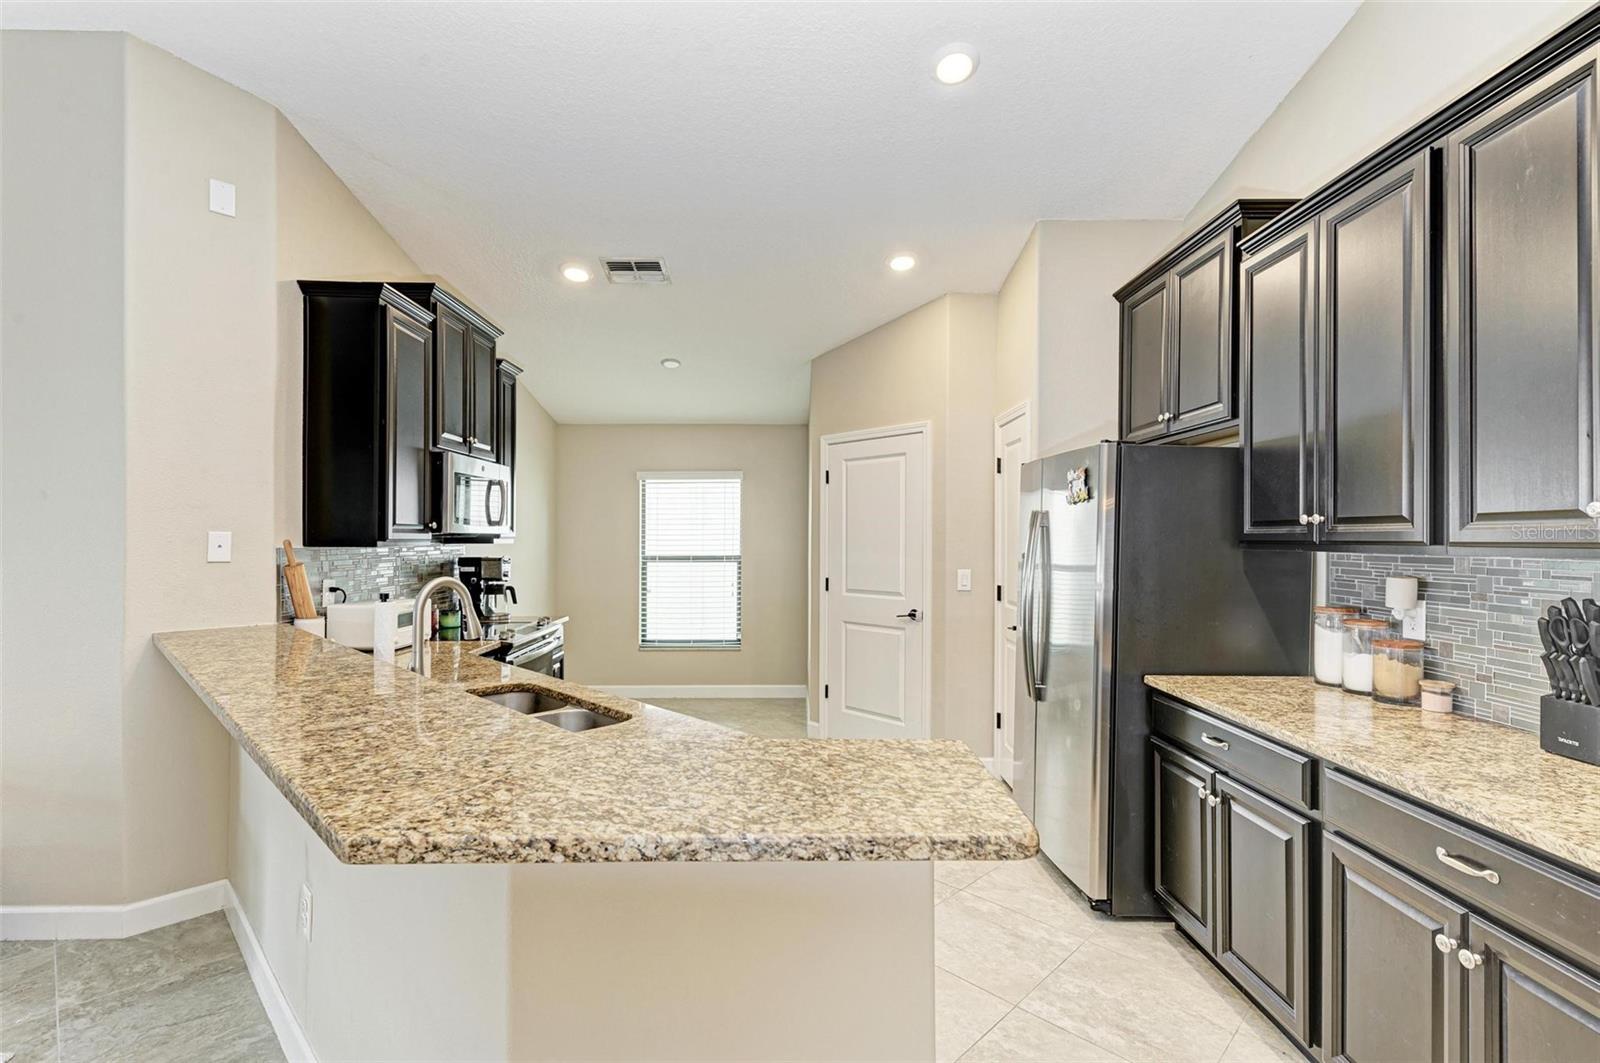 Chef's kitchen!  Spacious and modern.  Door to laundry room/garage